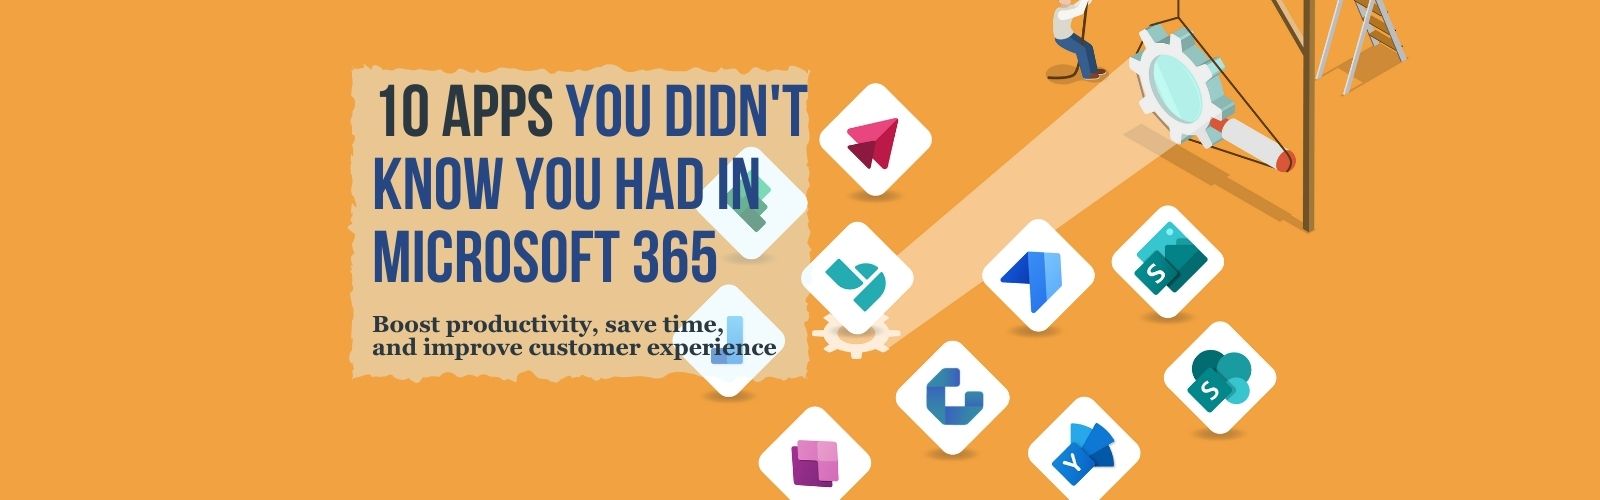 10 Apps you didn't know you had in Microsoft 365: Boost productivity, save time, and improve customer experience